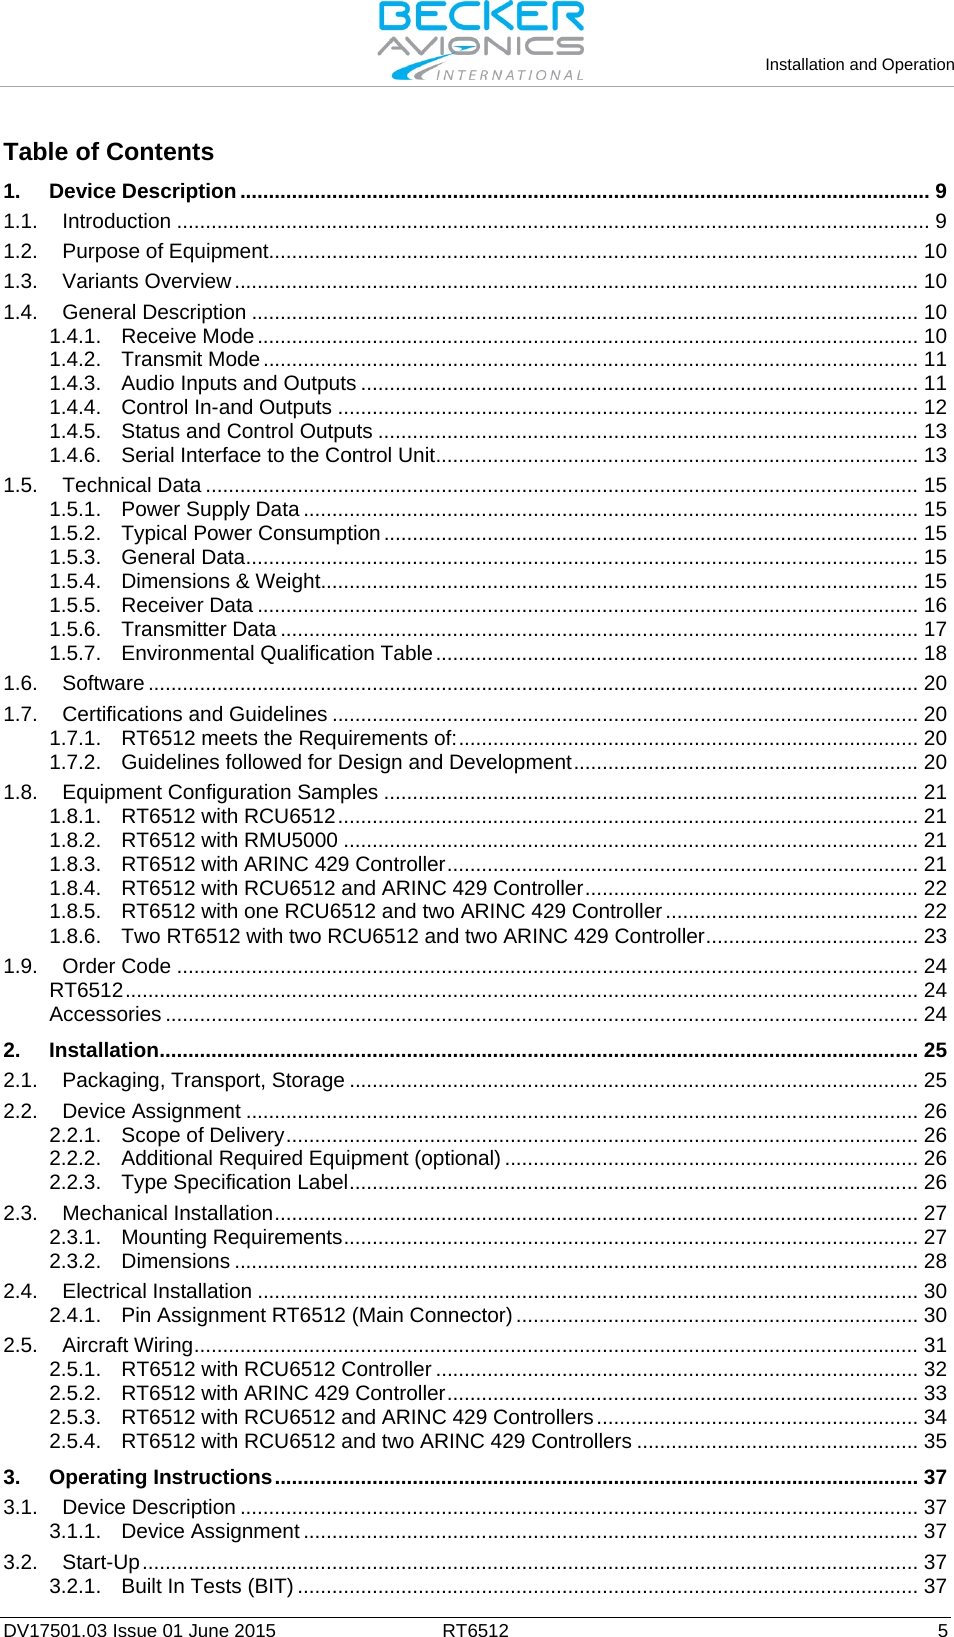   Installation and Operation   DV17501.03 Issue 01 June 2015 RT6512  5 Table of Contents 1. Device Description ........................................................................................................................ 9 1.1. Introduction ................................................................................................................................... 9 1.2. Purpose of Equipment ................................................................................................................. 10 1.3. Variants Overview ....................................................................................................................... 10 1.4. General Description .................................................................................................................... 10 1.4.1. Receive Mode ................................................................................................................... 10 1.4.2. Transmit Mode .................................................................................................................. 11 1.4.3. Audio Inputs and Outputs ................................................................................................. 11 1.4.4. Control In-and Outputs ..................................................................................................... 12 1.4.5. Status and Control Outputs .............................................................................................. 13 1.4.6. Serial Interface to the Control Unit .................................................................................... 13 1.5. Technical Data ............................................................................................................................ 15 1.5.1. Power Supply Data ........................................................................................................... 15 1.5.2. Typical Power Consumption ............................................................................................. 15 1.5.3. General Data ..................................................................................................................... 15 1.5.4. Dimensions &amp; Weight........................................................................................................ 15 1.5.5. Receiver Data ................................................................................................................... 16 1.5.6. Transmitter Data ............................................................................................................... 17 1.5.7. Environmental Qualification Table .................................................................................... 18 1.6. Software ...................................................................................................................................... 20 1.7. Certifications and Guidelines ...................................................................................................... 20 1.7.1. RT6512 meets the Requirements of: ................................................................................ 20 1.7.2. Guidelines followed for Design and Development ............................................................ 20 1.8. Equipment Configuration Samples ............................................................................................. 21 1.8.1. RT6512 with RCU6512 ..................................................................................................... 21 1.8.2. RT6512 with RMU5000 .................................................................................................... 21 1.8.3. RT6512 with ARINC 429 Controller .................................................................................. 21 1.8.4. RT6512 with RCU6512 and ARINC 429 Controller .......................................................... 22 1.8.5. RT6512 with one RCU6512 and two ARINC 429 Controller ............................................ 22 1.8.6. Two RT6512 with two RCU6512 and two ARINC 429 Controller ..................................... 23 1.9. Order Code ................................................................................................................................. 24 RT6512 .......................................................................................................................................... 24 Accessories ................................................................................................................................... 24 2. Installation .................................................................................................................................... 25 2.1. Packaging, Transport, Storage ................................................................................................... 25 2.2. Device Assignment ..................................................................................................................... 26 2.2.1. Scope of Delivery .............................................................................................................. 26 2.2.2. Additional Required Equipment (optional) ........................................................................ 26 2.2.3. Type Specification Label ................................................................................................... 26 2.3. Mechanical Installation ................................................................................................................ 27 2.3.1. Mounting Requirements .................................................................................................... 27 2.3.2. Dimensions ....................................................................................................................... 28 2.4. Electrical Installation ................................................................................................................... 30 2.4.1. Pin Assignment RT6512 (Main Connector) ...................................................................... 30 2.5. Aircraft Wiring .............................................................................................................................. 31 2.5.1. RT6512 with RCU6512 Controller .................................................................................... 32 2.5.2. RT6512 with ARINC 429 Controller .................................................................................. 33 2.5.3. RT6512 with RCU6512 and ARINC 429 Controllers ........................................................ 34 2.5.4. RT6512 with RCU6512 and two ARINC 429 Controllers ................................................. 35 3. Operating Instructions ................................................................................................................ 37 3.1. Device Description ...................................................................................................................... 37 3.1.1. Device Assignment ........................................................................................................... 37 3.2. Start-Up ....................................................................................................................................... 37 3.2.1. Built In Tests (BIT) ............................................................................................................ 37 